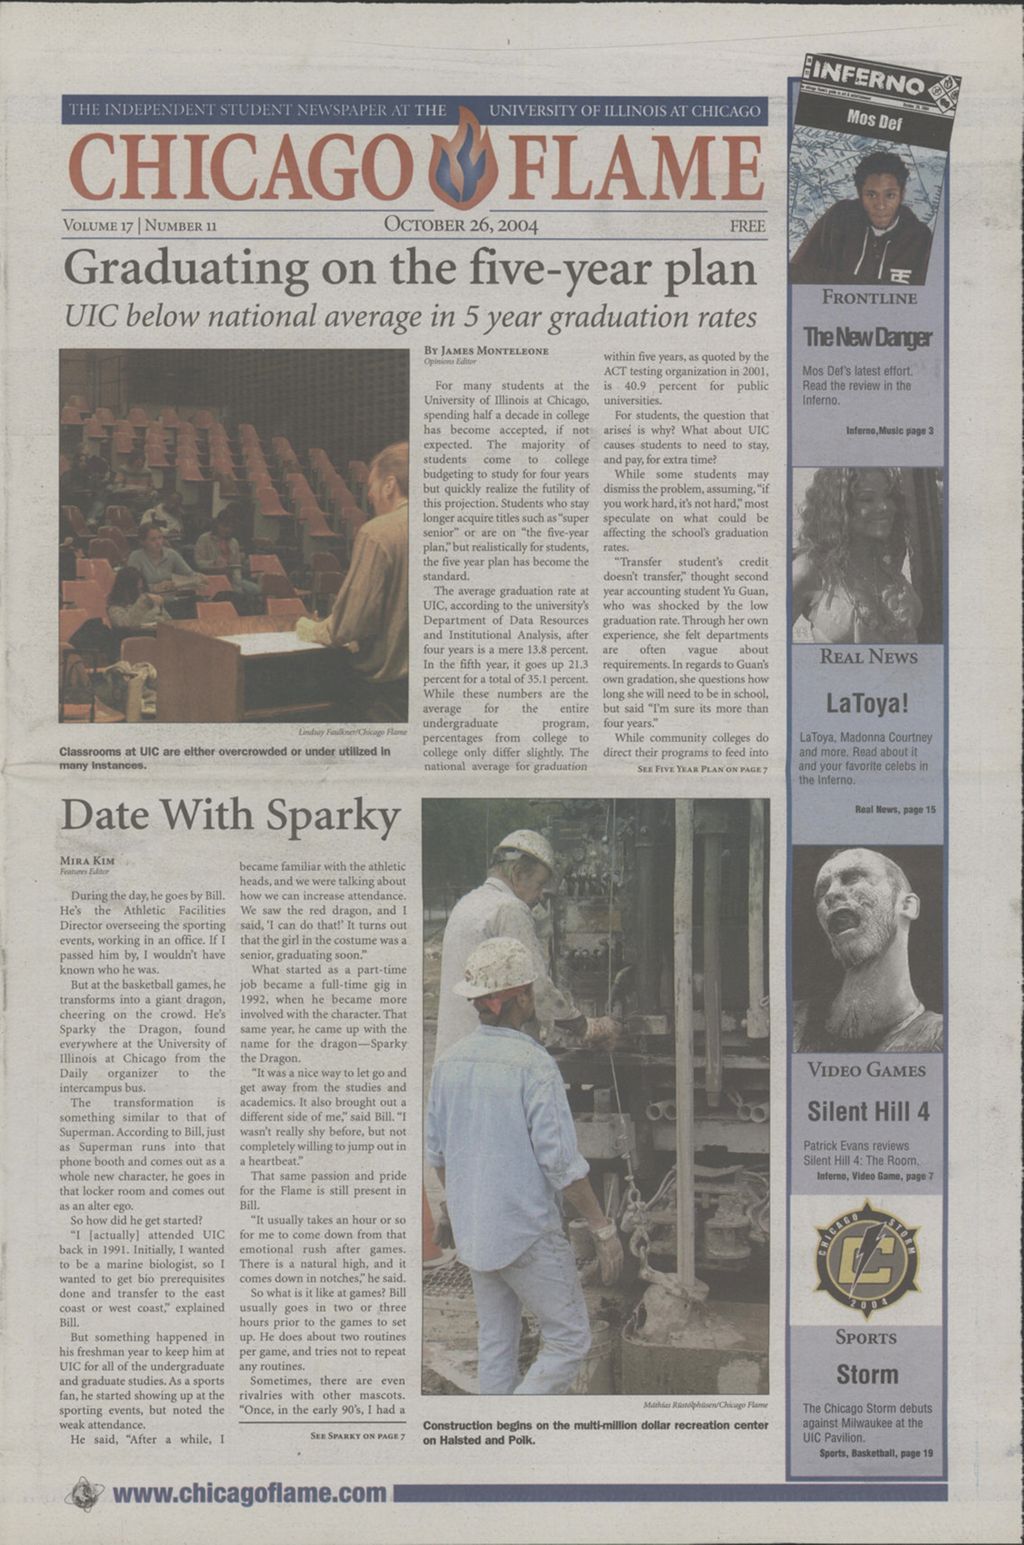 Chicago Flame (October 26, 2004)